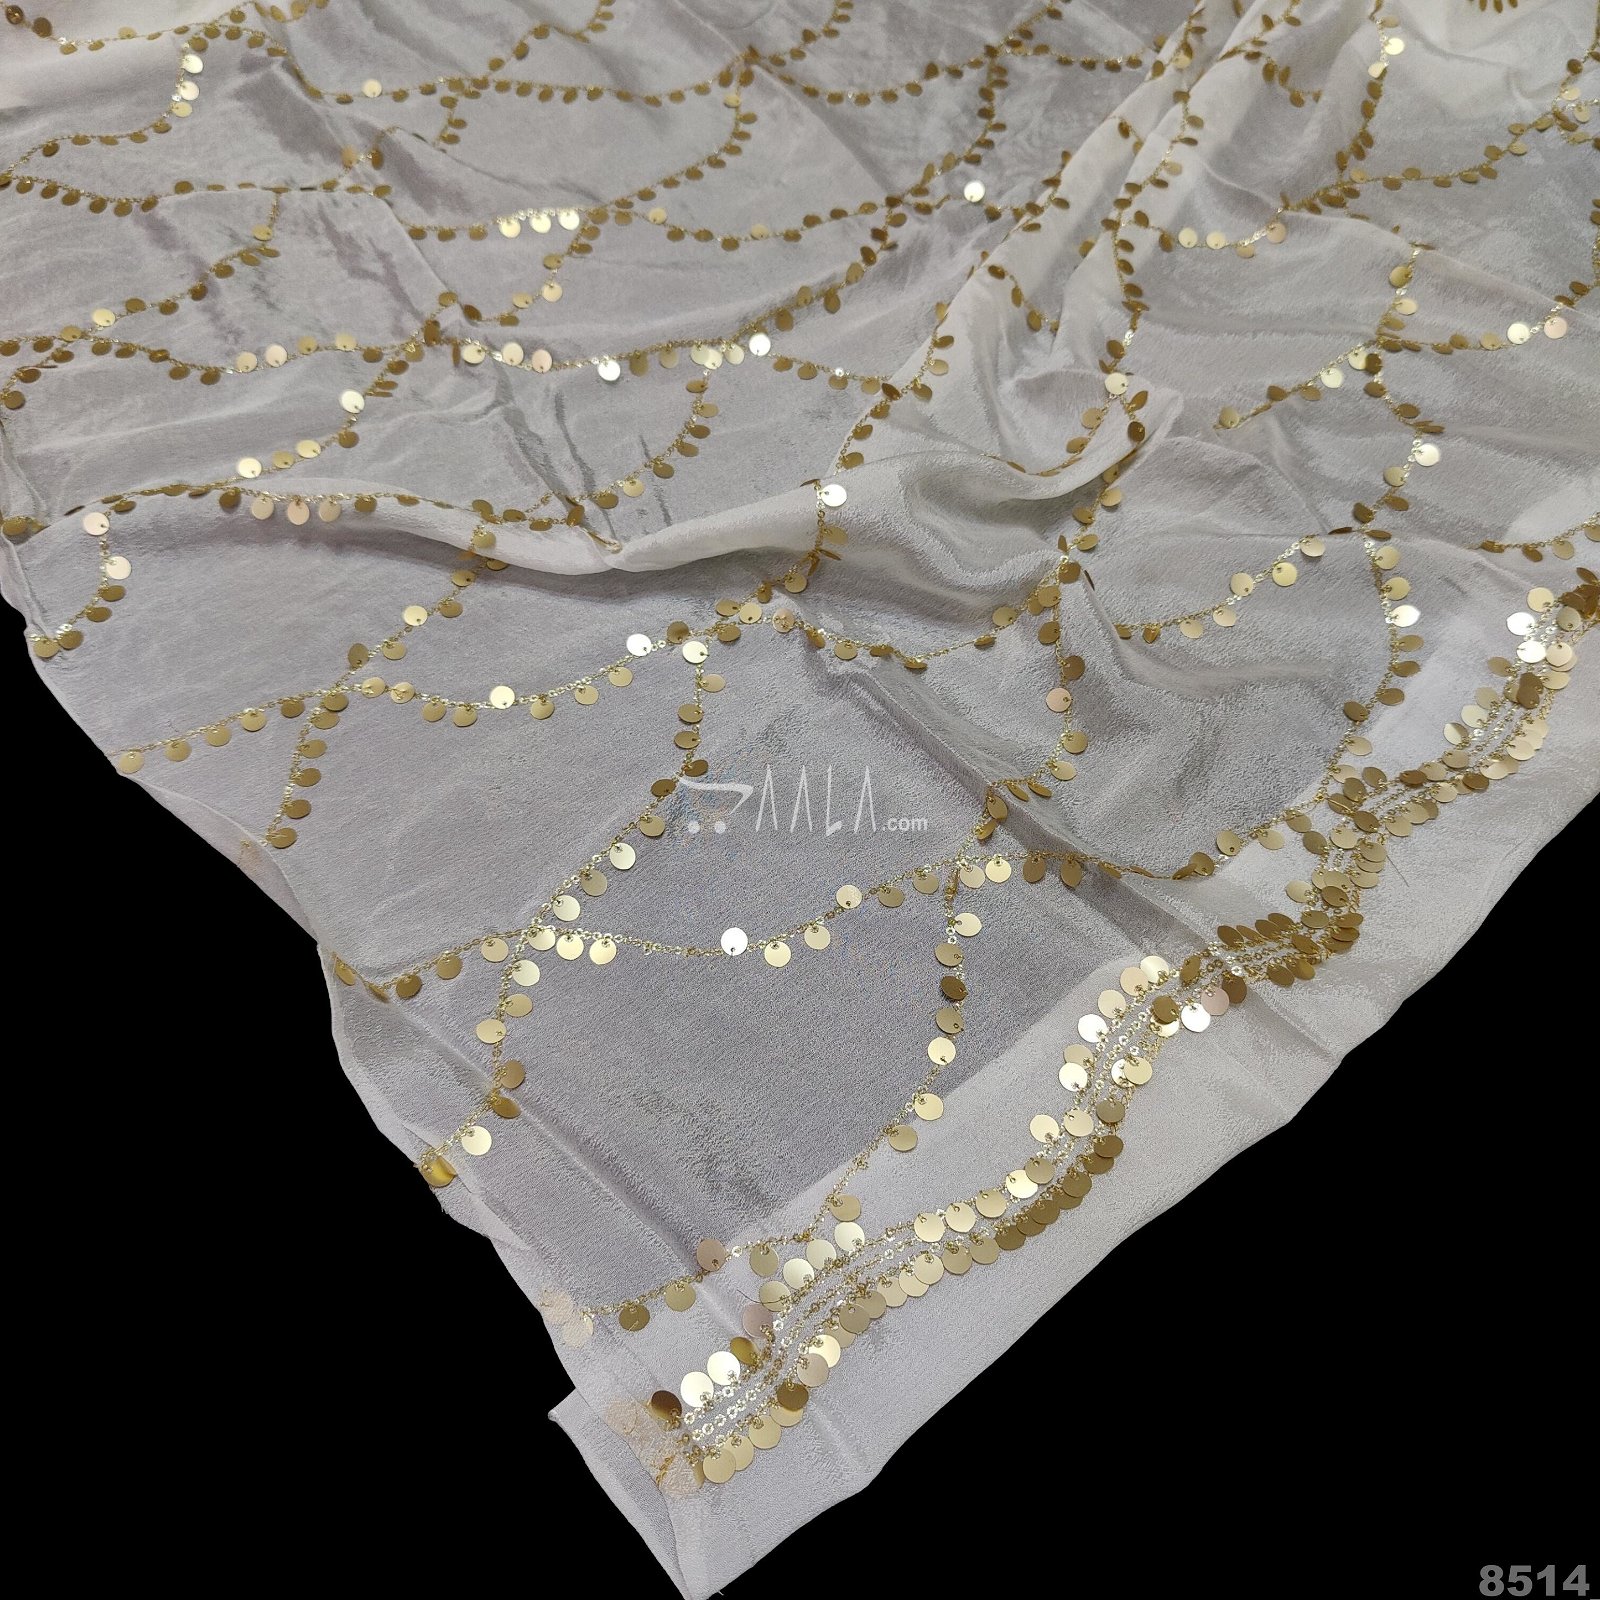 Embroidered Crepe-Chiffon Viscose Dupatta-40-Inches DYEABLE 2.50-Metres #8514